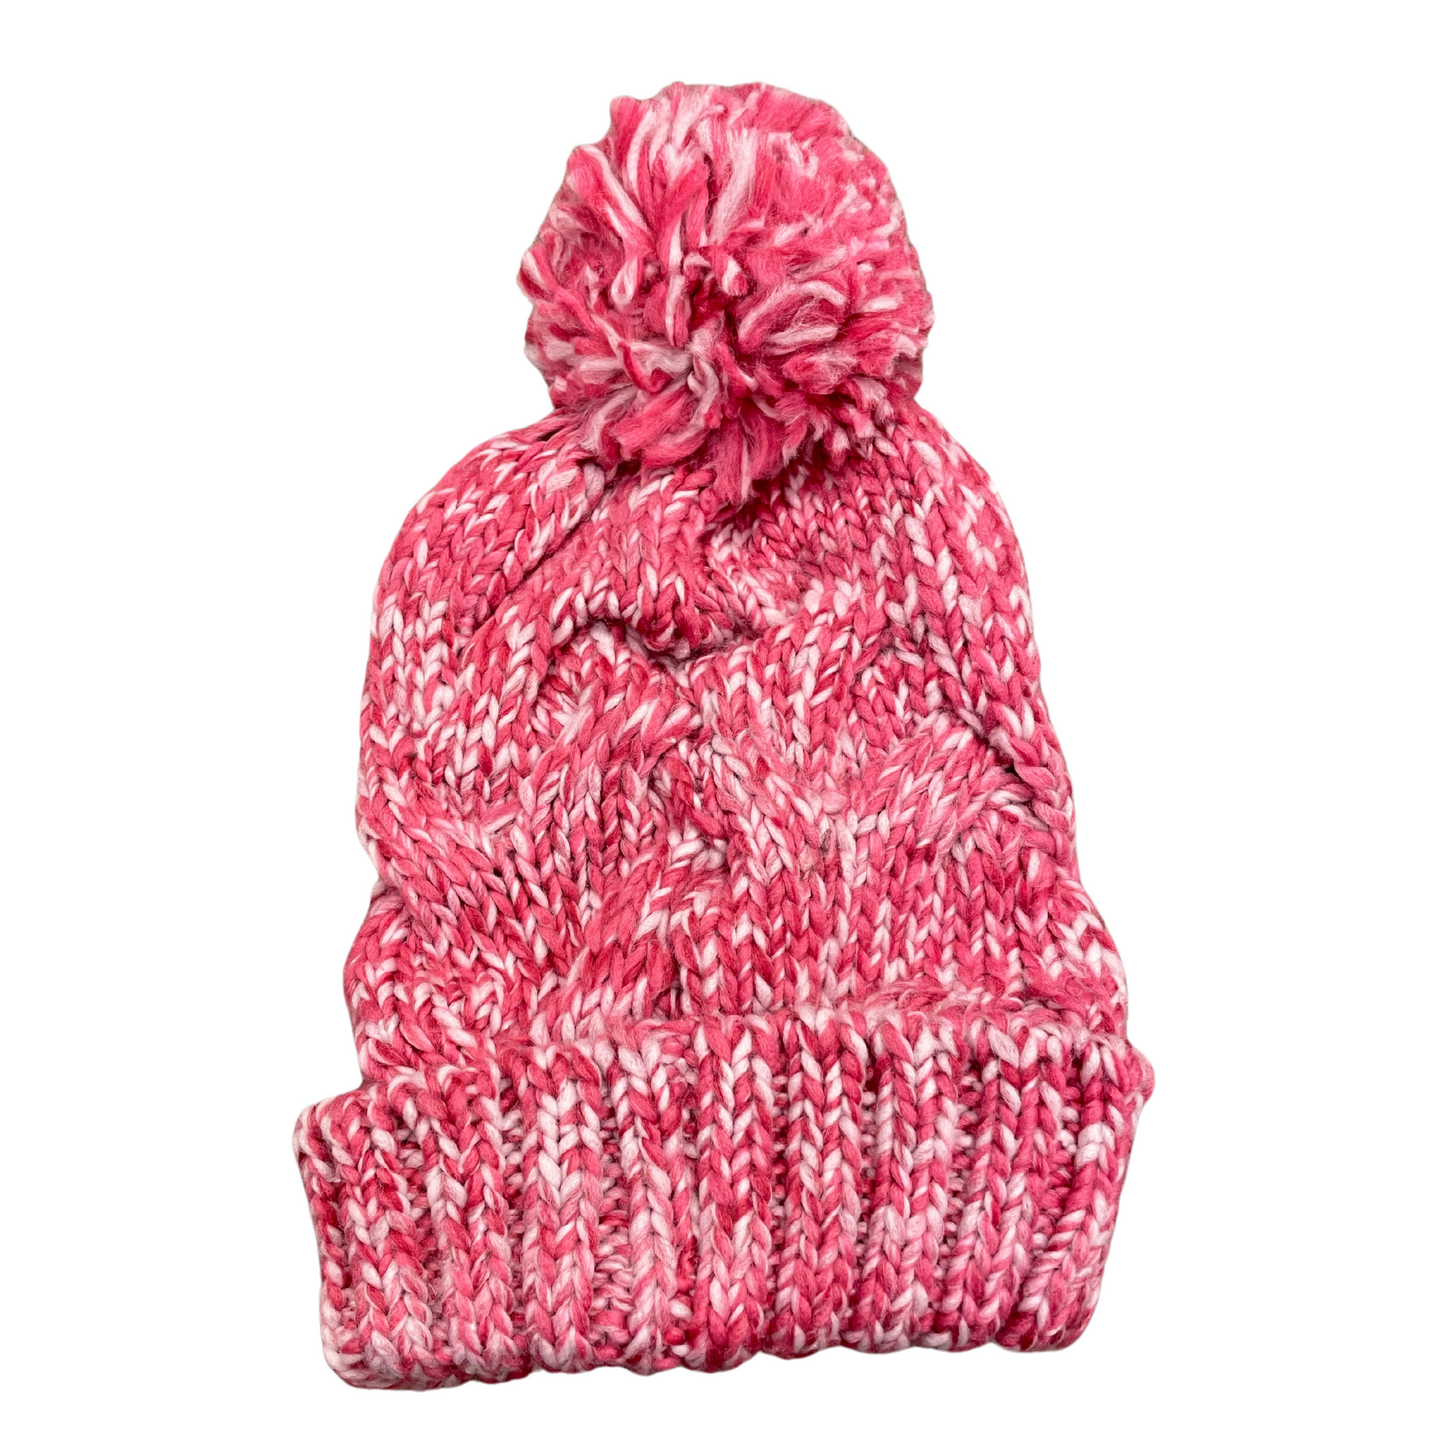 Minky Pompom Crochet Beanies (Available in 6 Colors!)